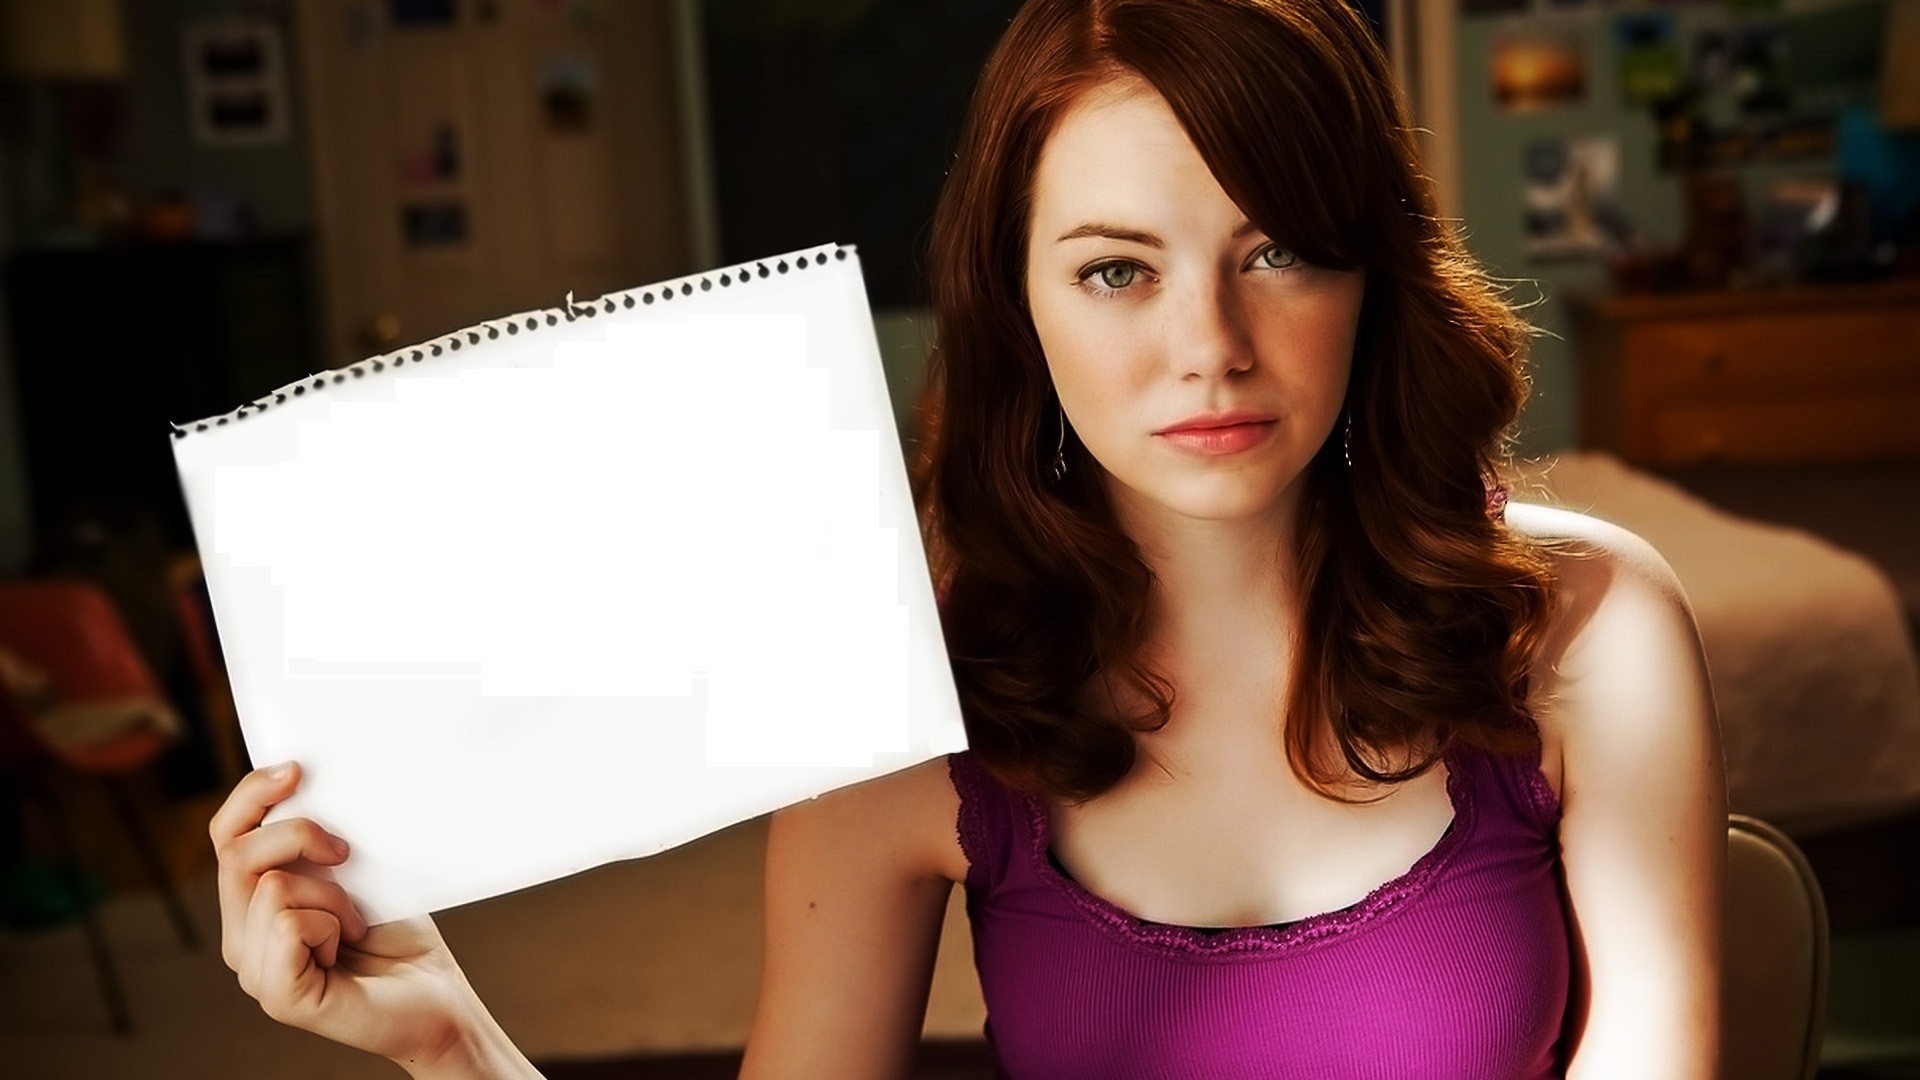 Hot Emma Stone Wallpaper And Image Pictures Photos